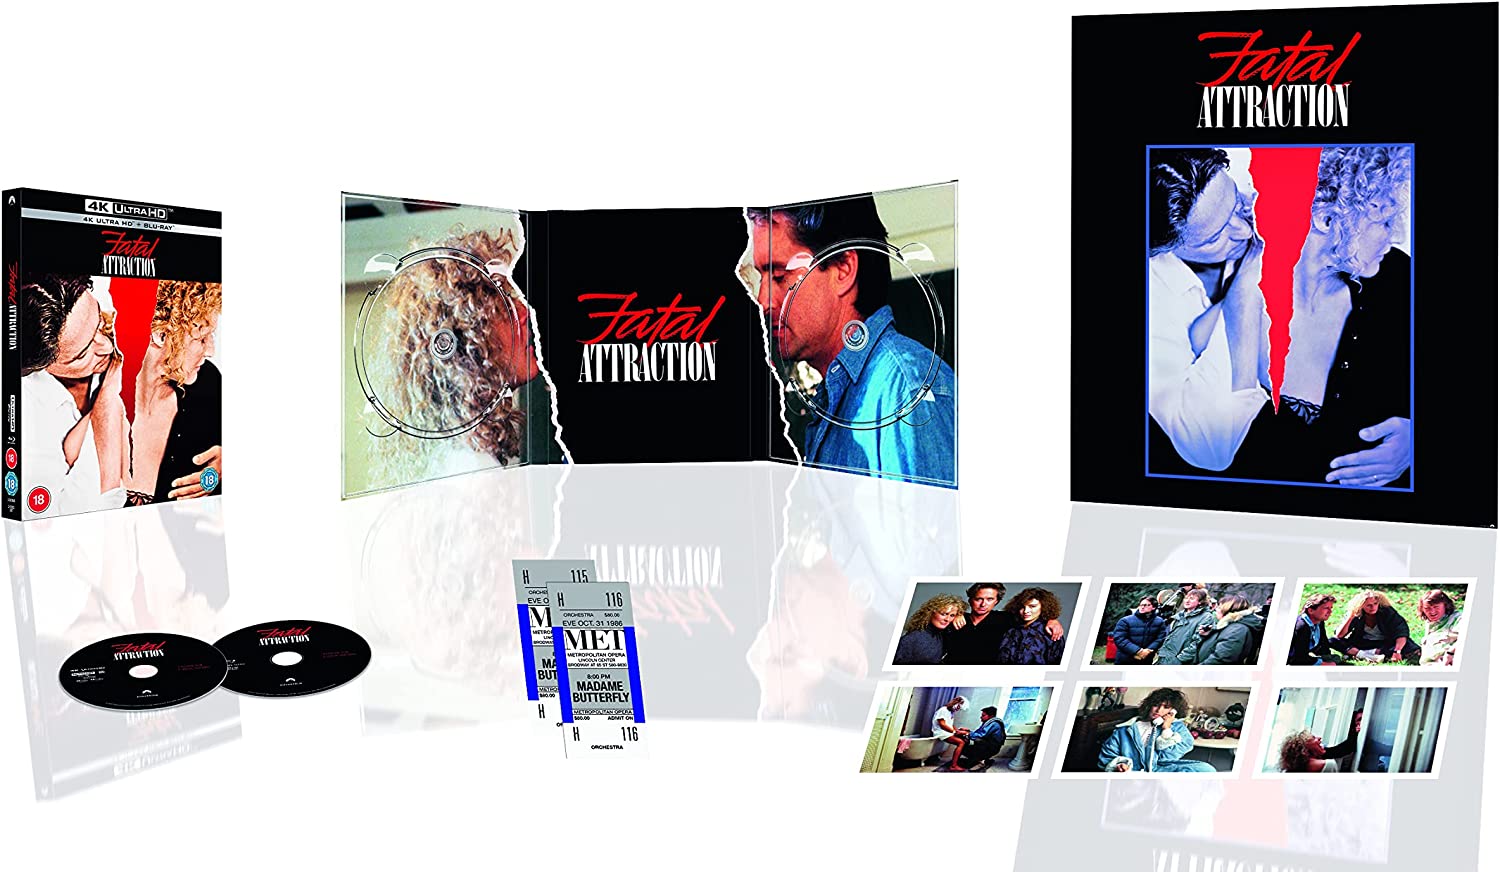 FATAL ATTRACTION (REGION FREE/B LIMITED EDITION) 4K UHD/BLU-RAY [SCRATCH AND DENT]